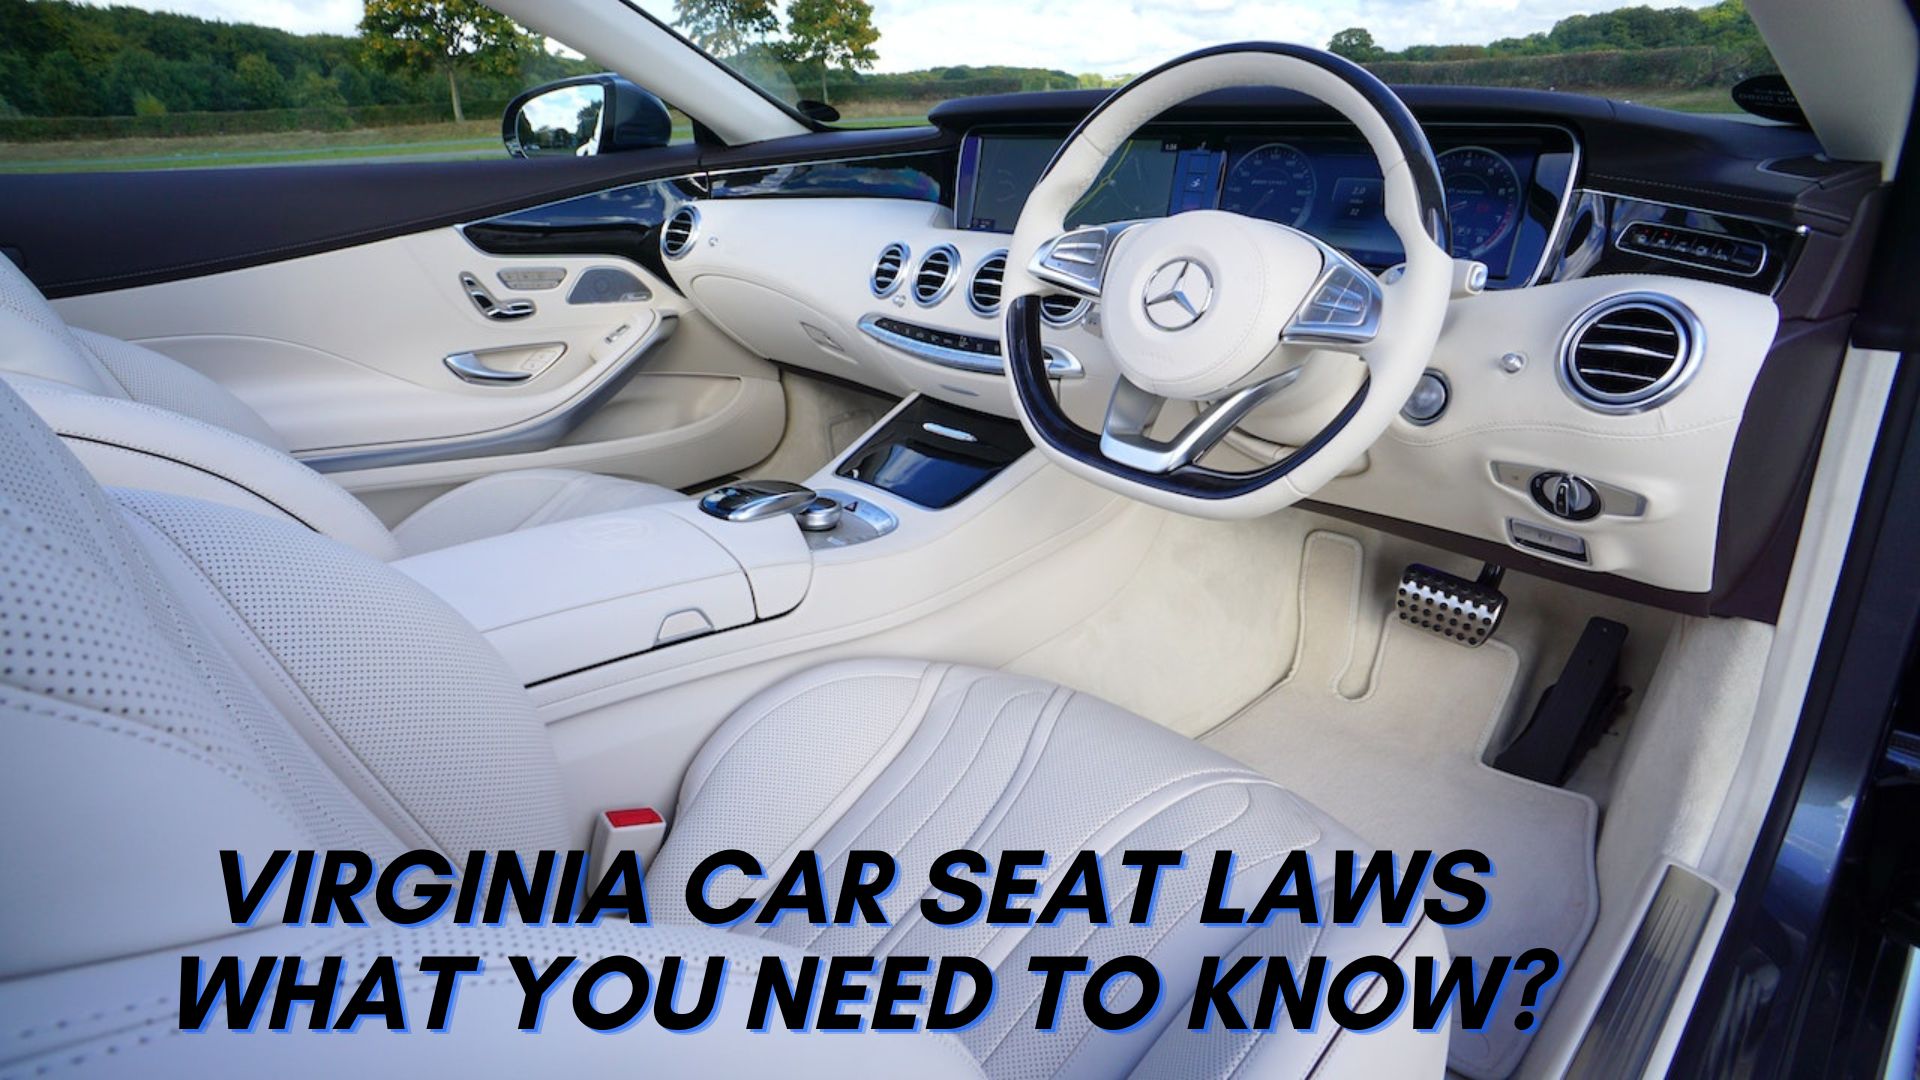 Virginia Car Seat Laws - Is It Different From The Other States?